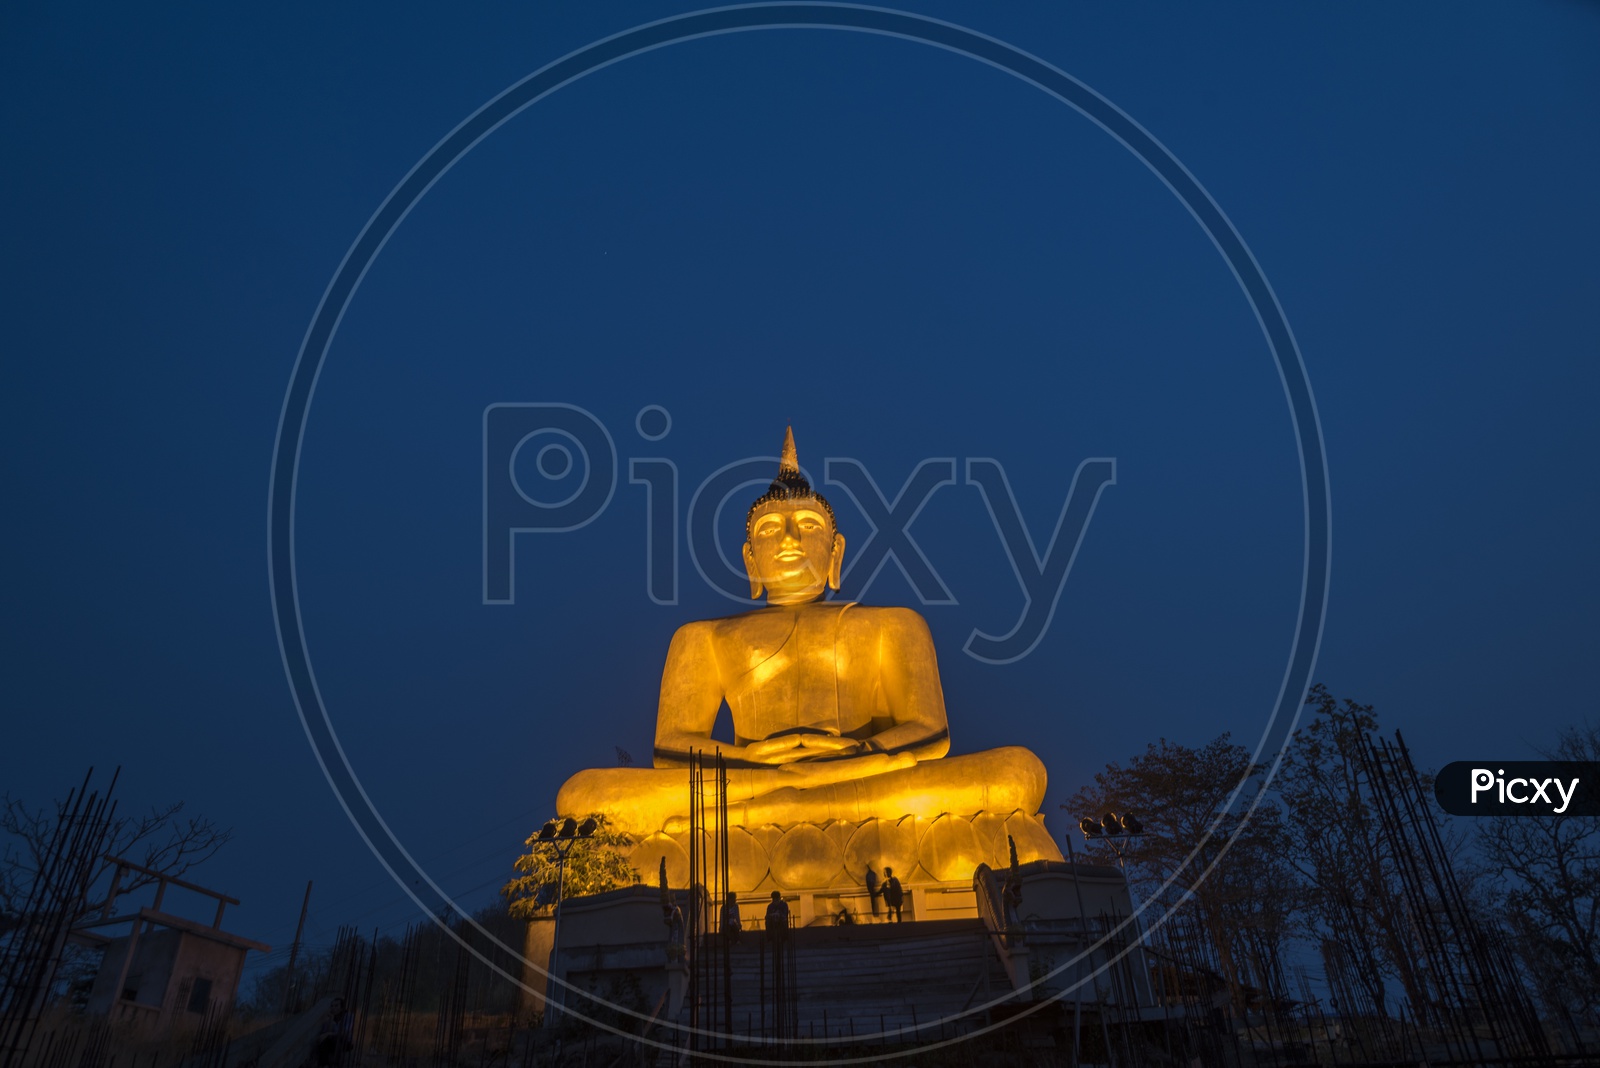 Giant Buddha Statue in Thailand during night